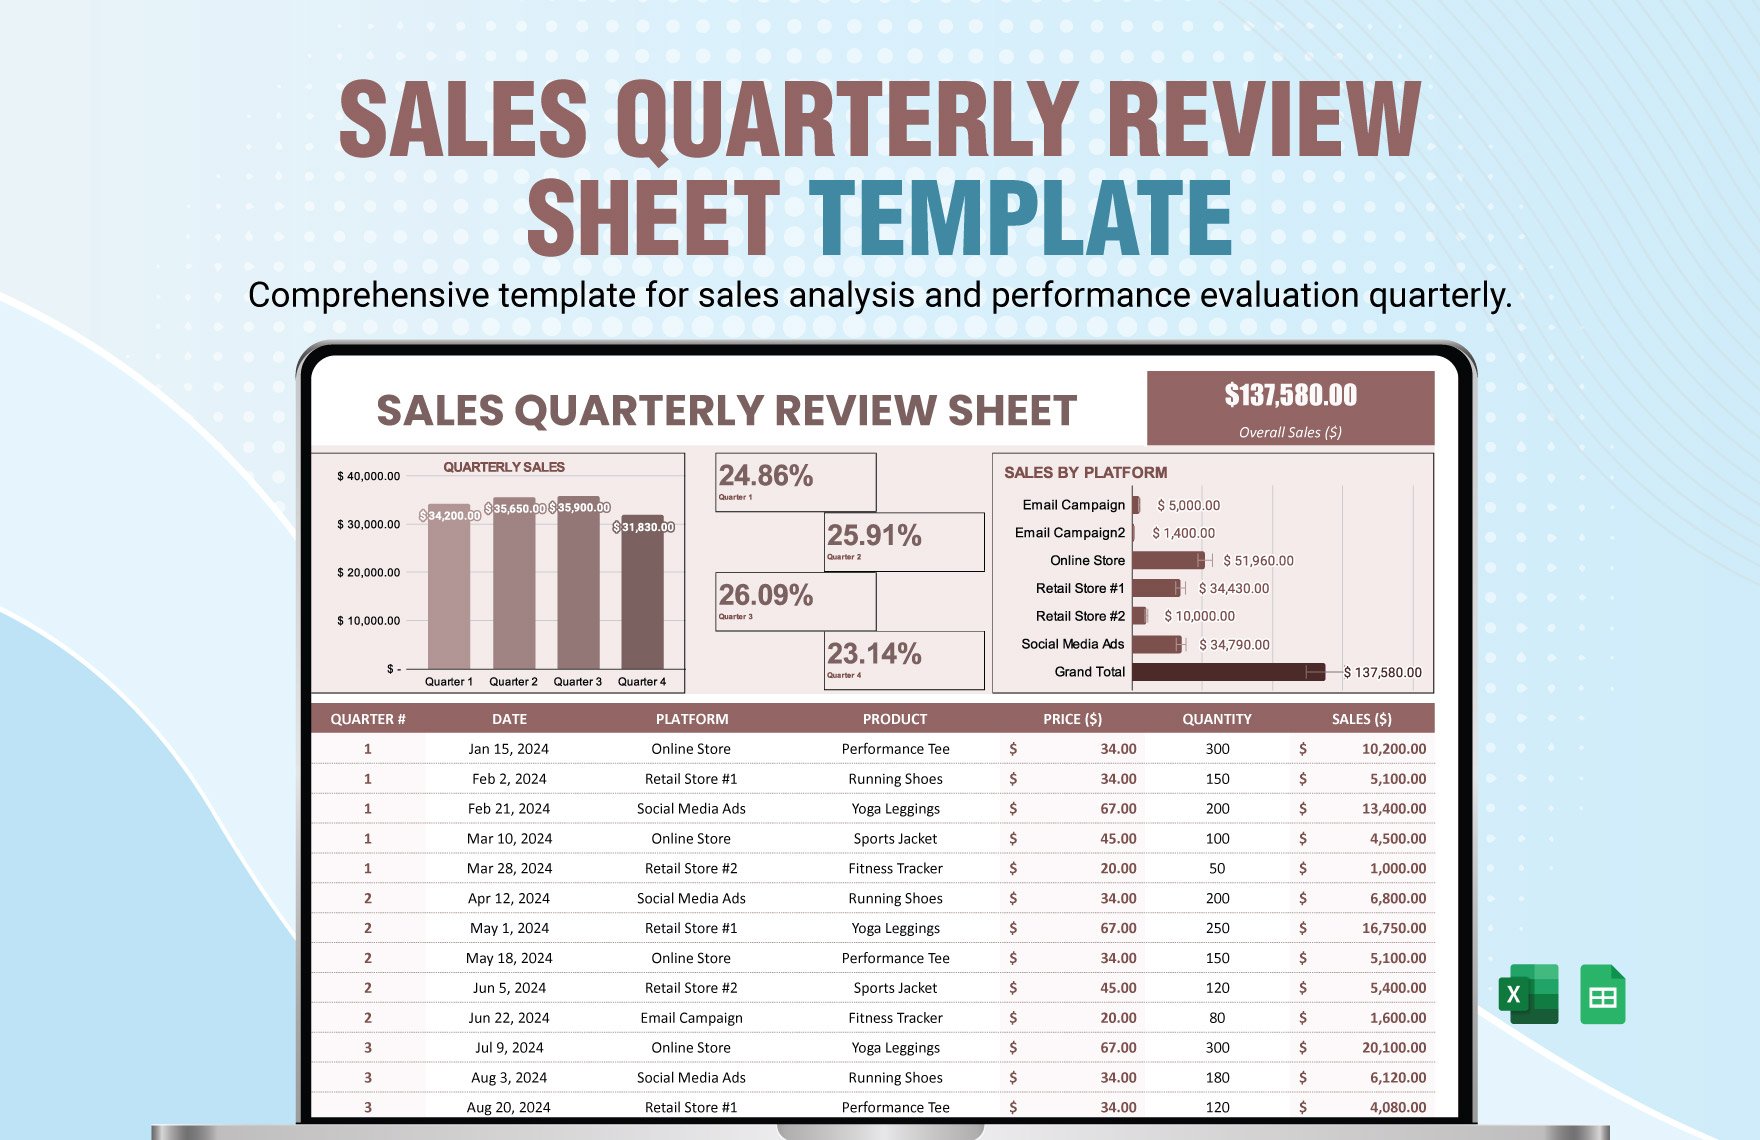 Sales Quarterly Review Sheet Template in Excel, Google Sheets